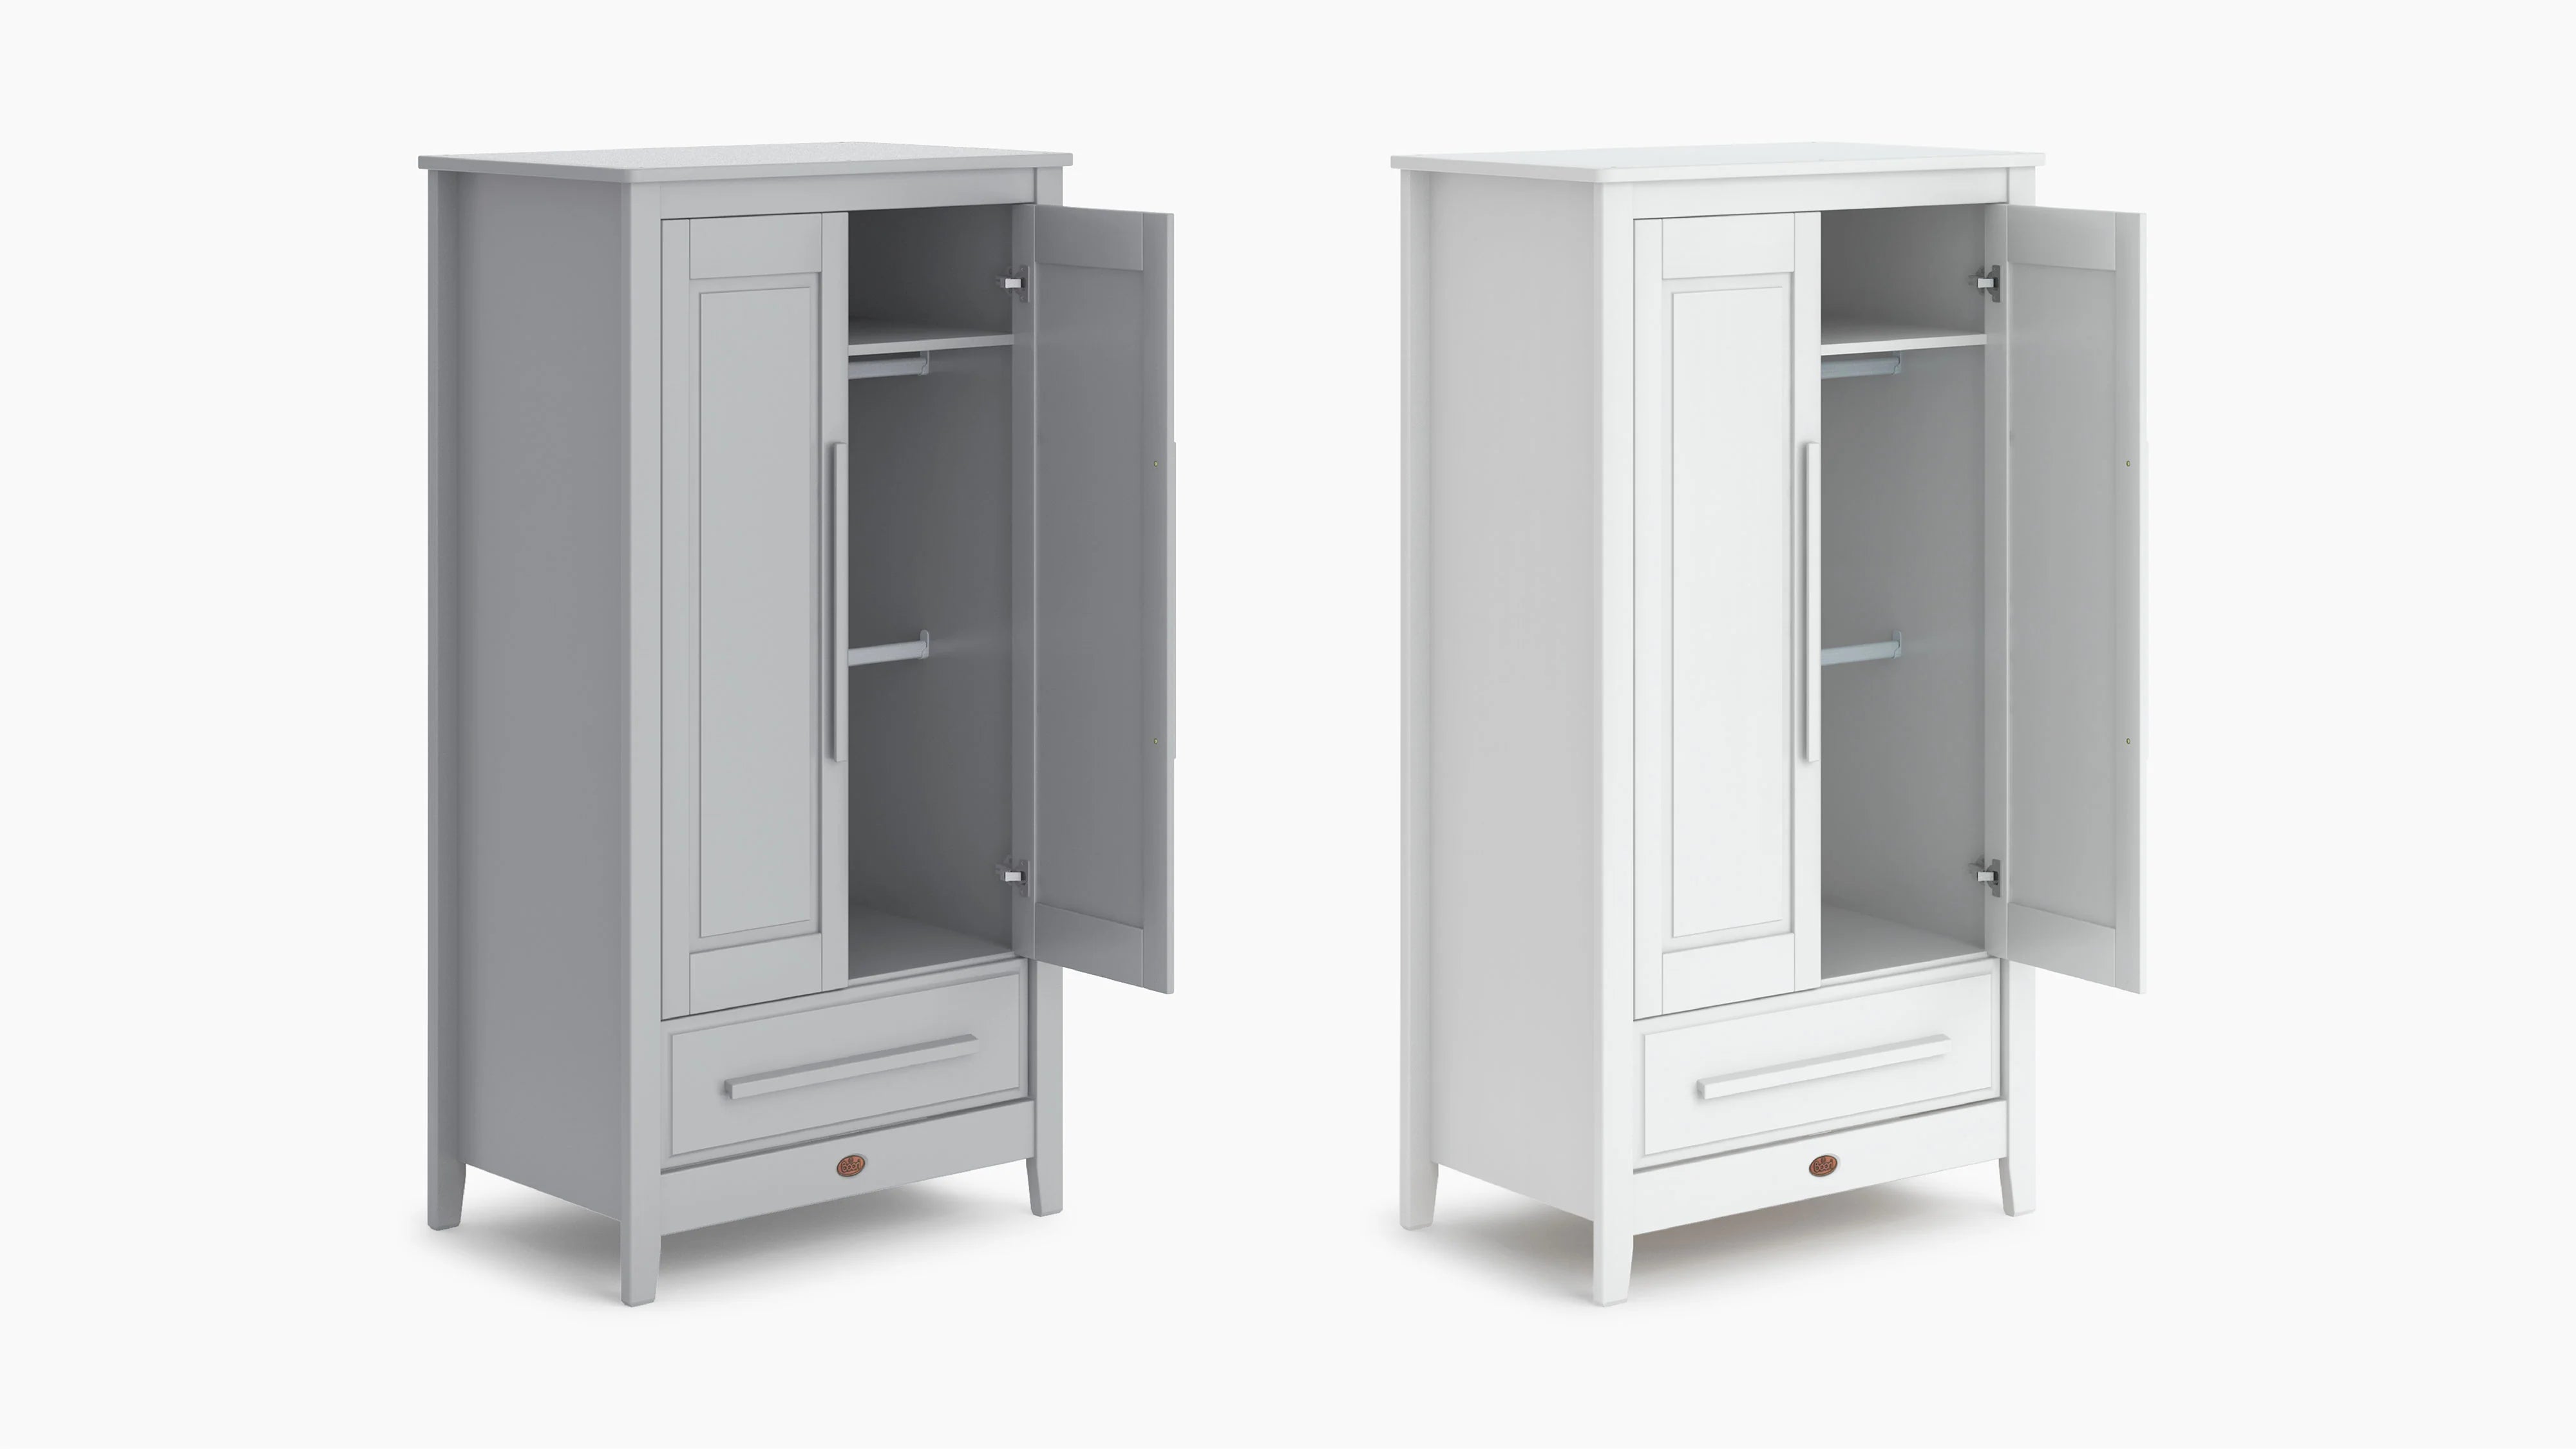 wardrobe painted in both grey and white